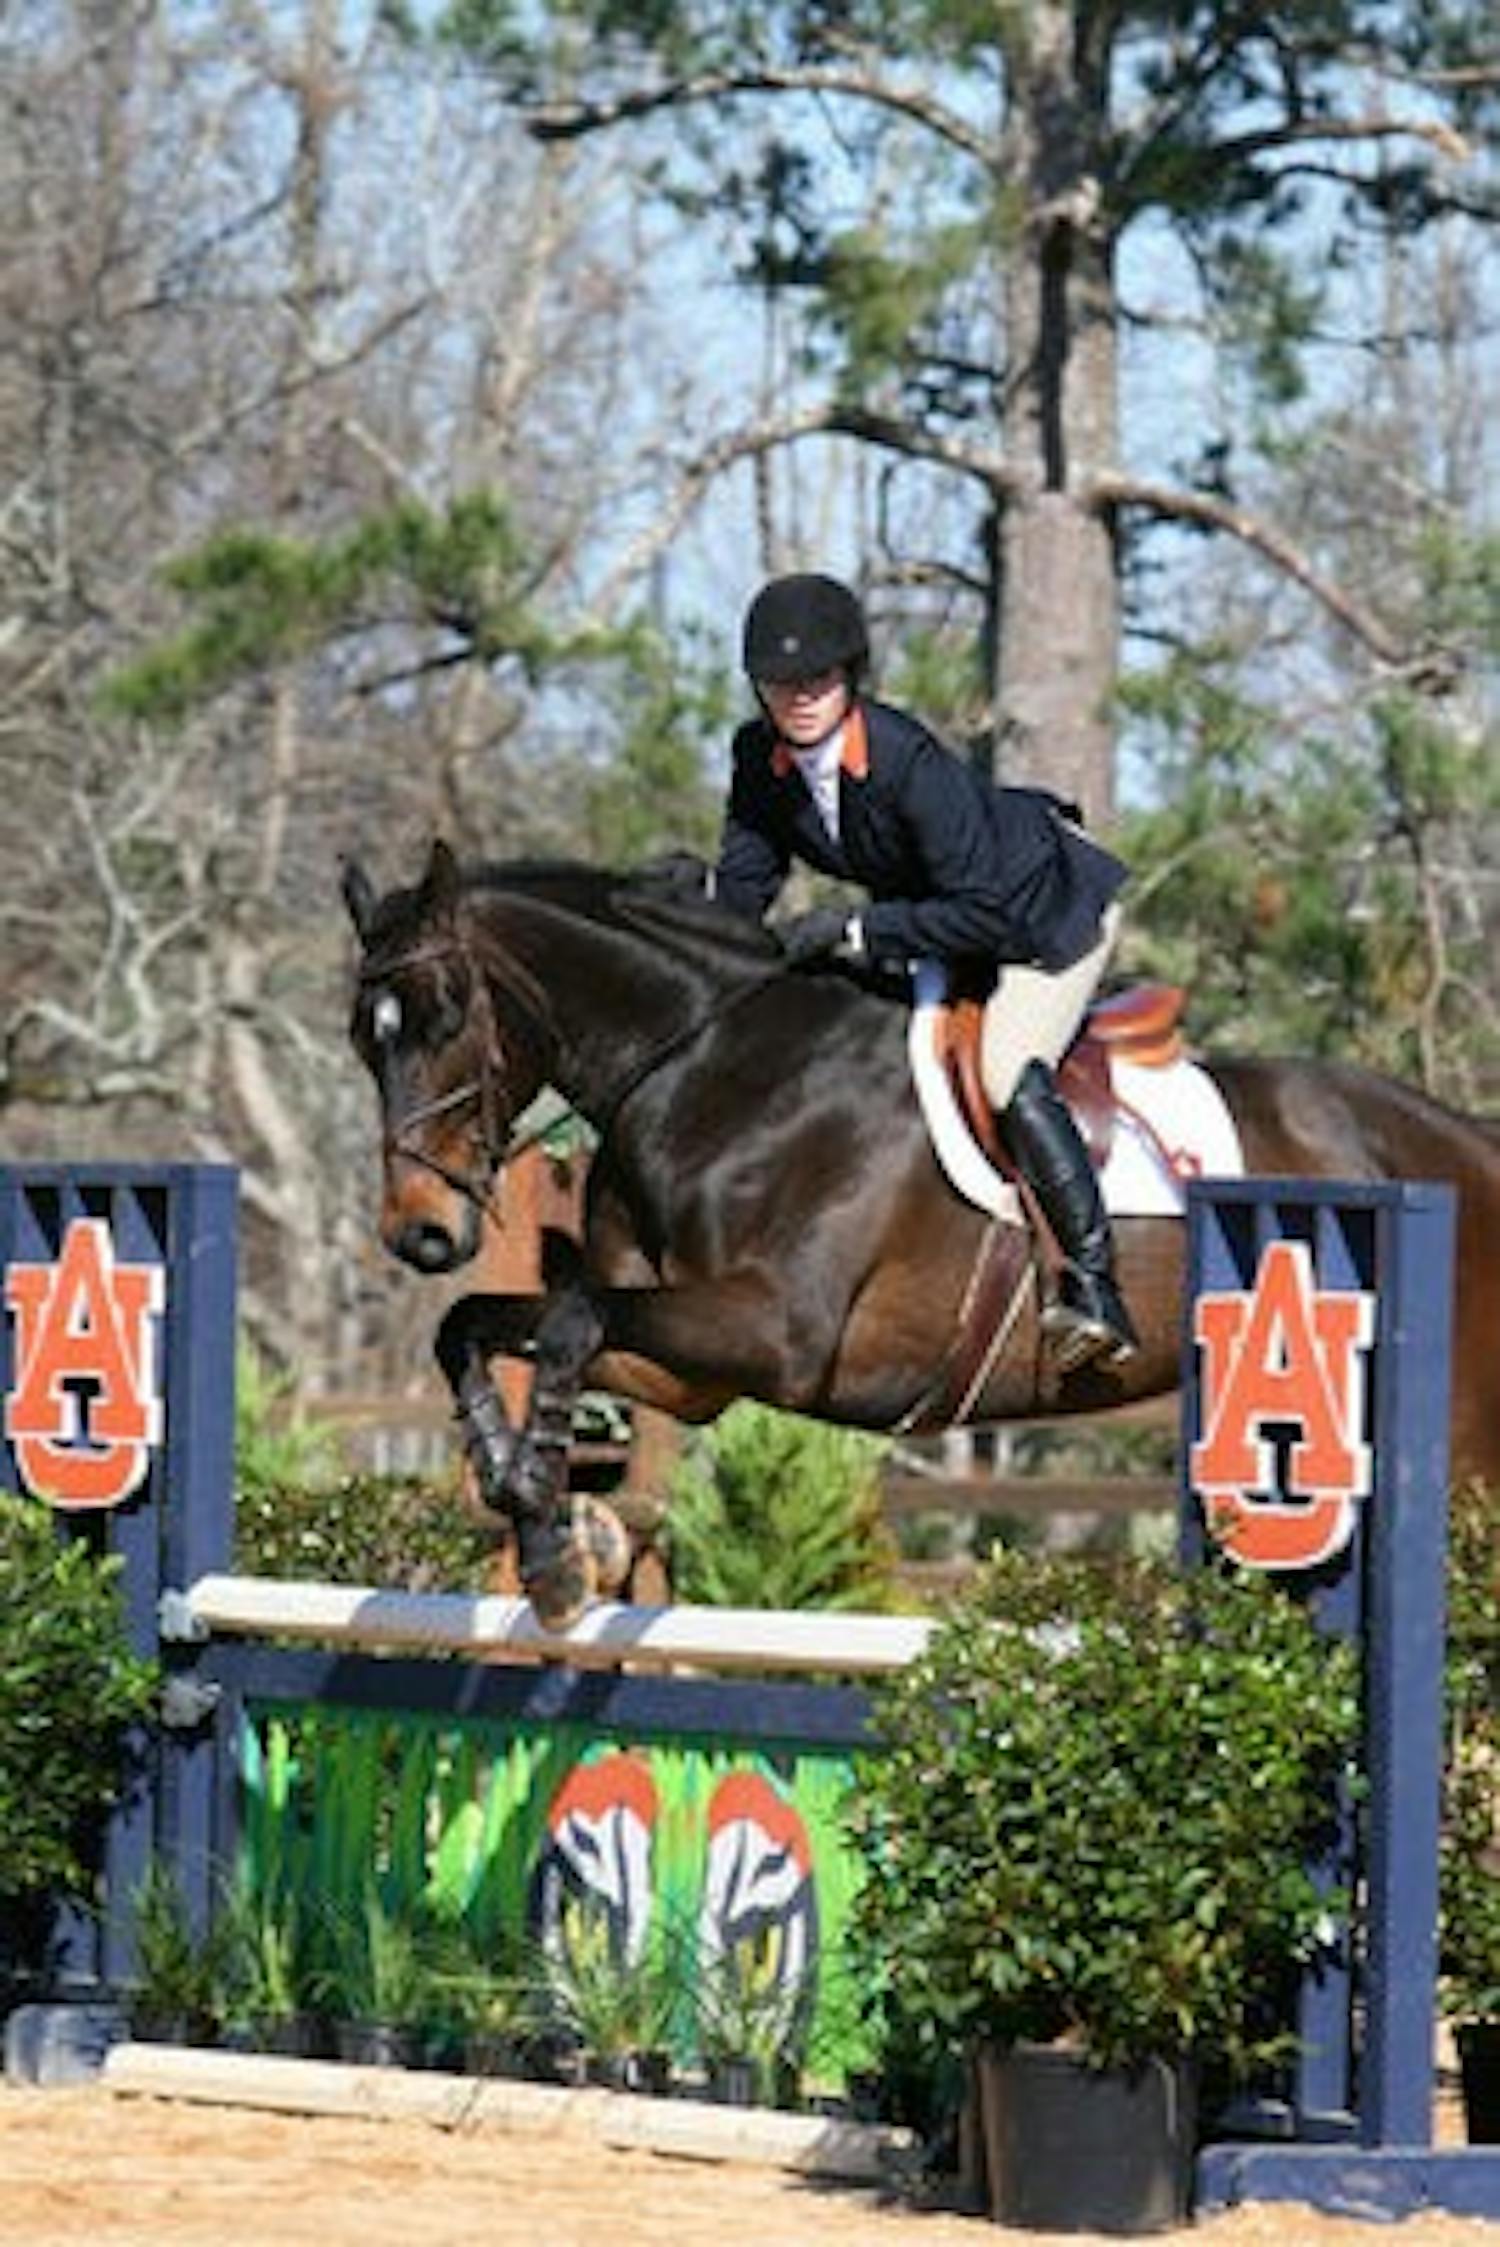 Senior hunt seat rider Maggie McAlary rides against Oklahoma State. The top-ranked equestrian team will compete at home Saturday against No. 3 Georgia, the only team to beat the Tigers this season. (Rebecca Croomes / PHOTO EDITOR)